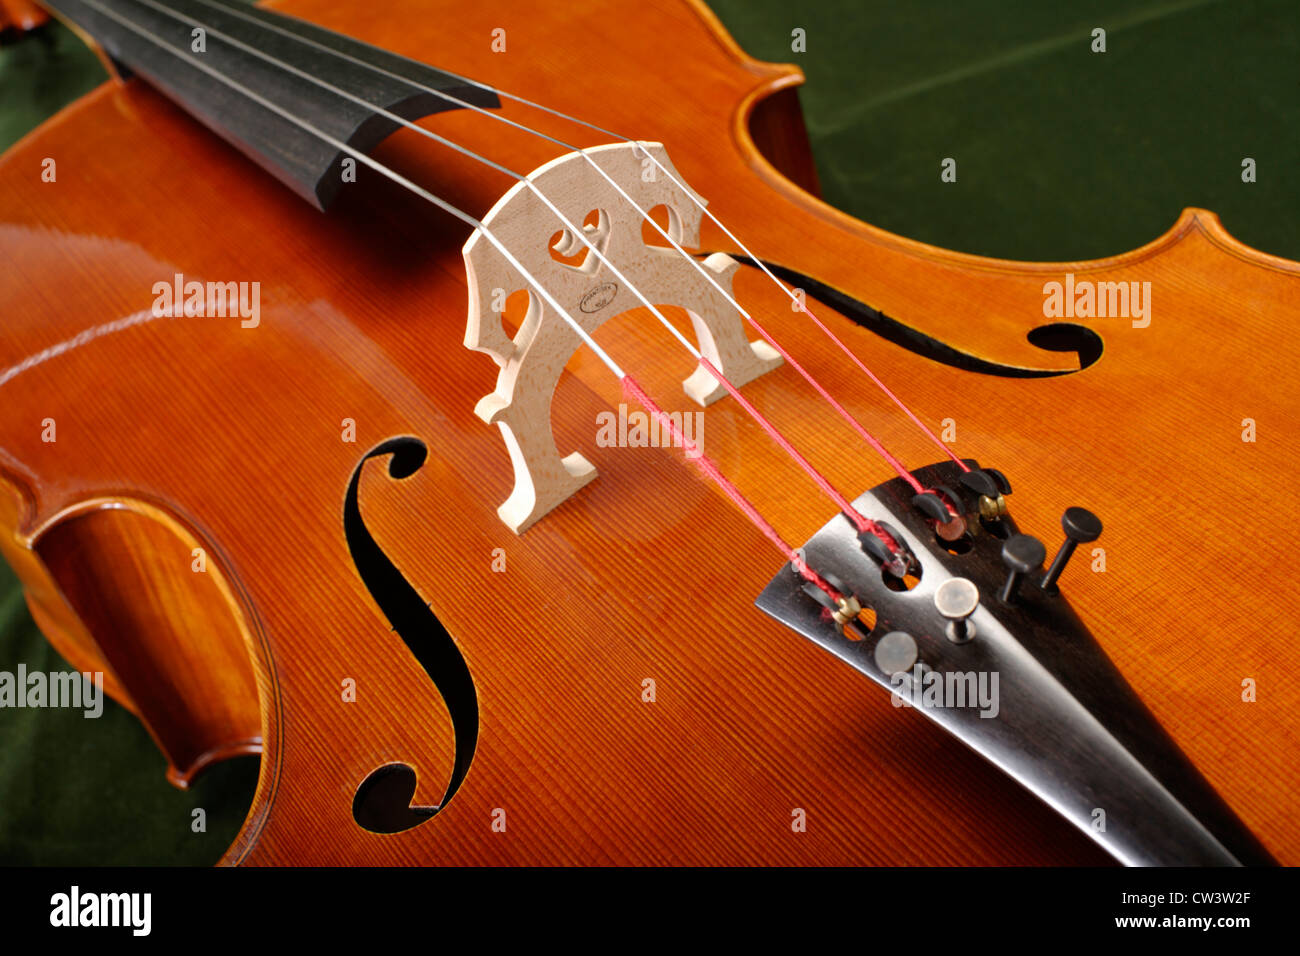 Violoncello musical instrument music detail string Stock Photo